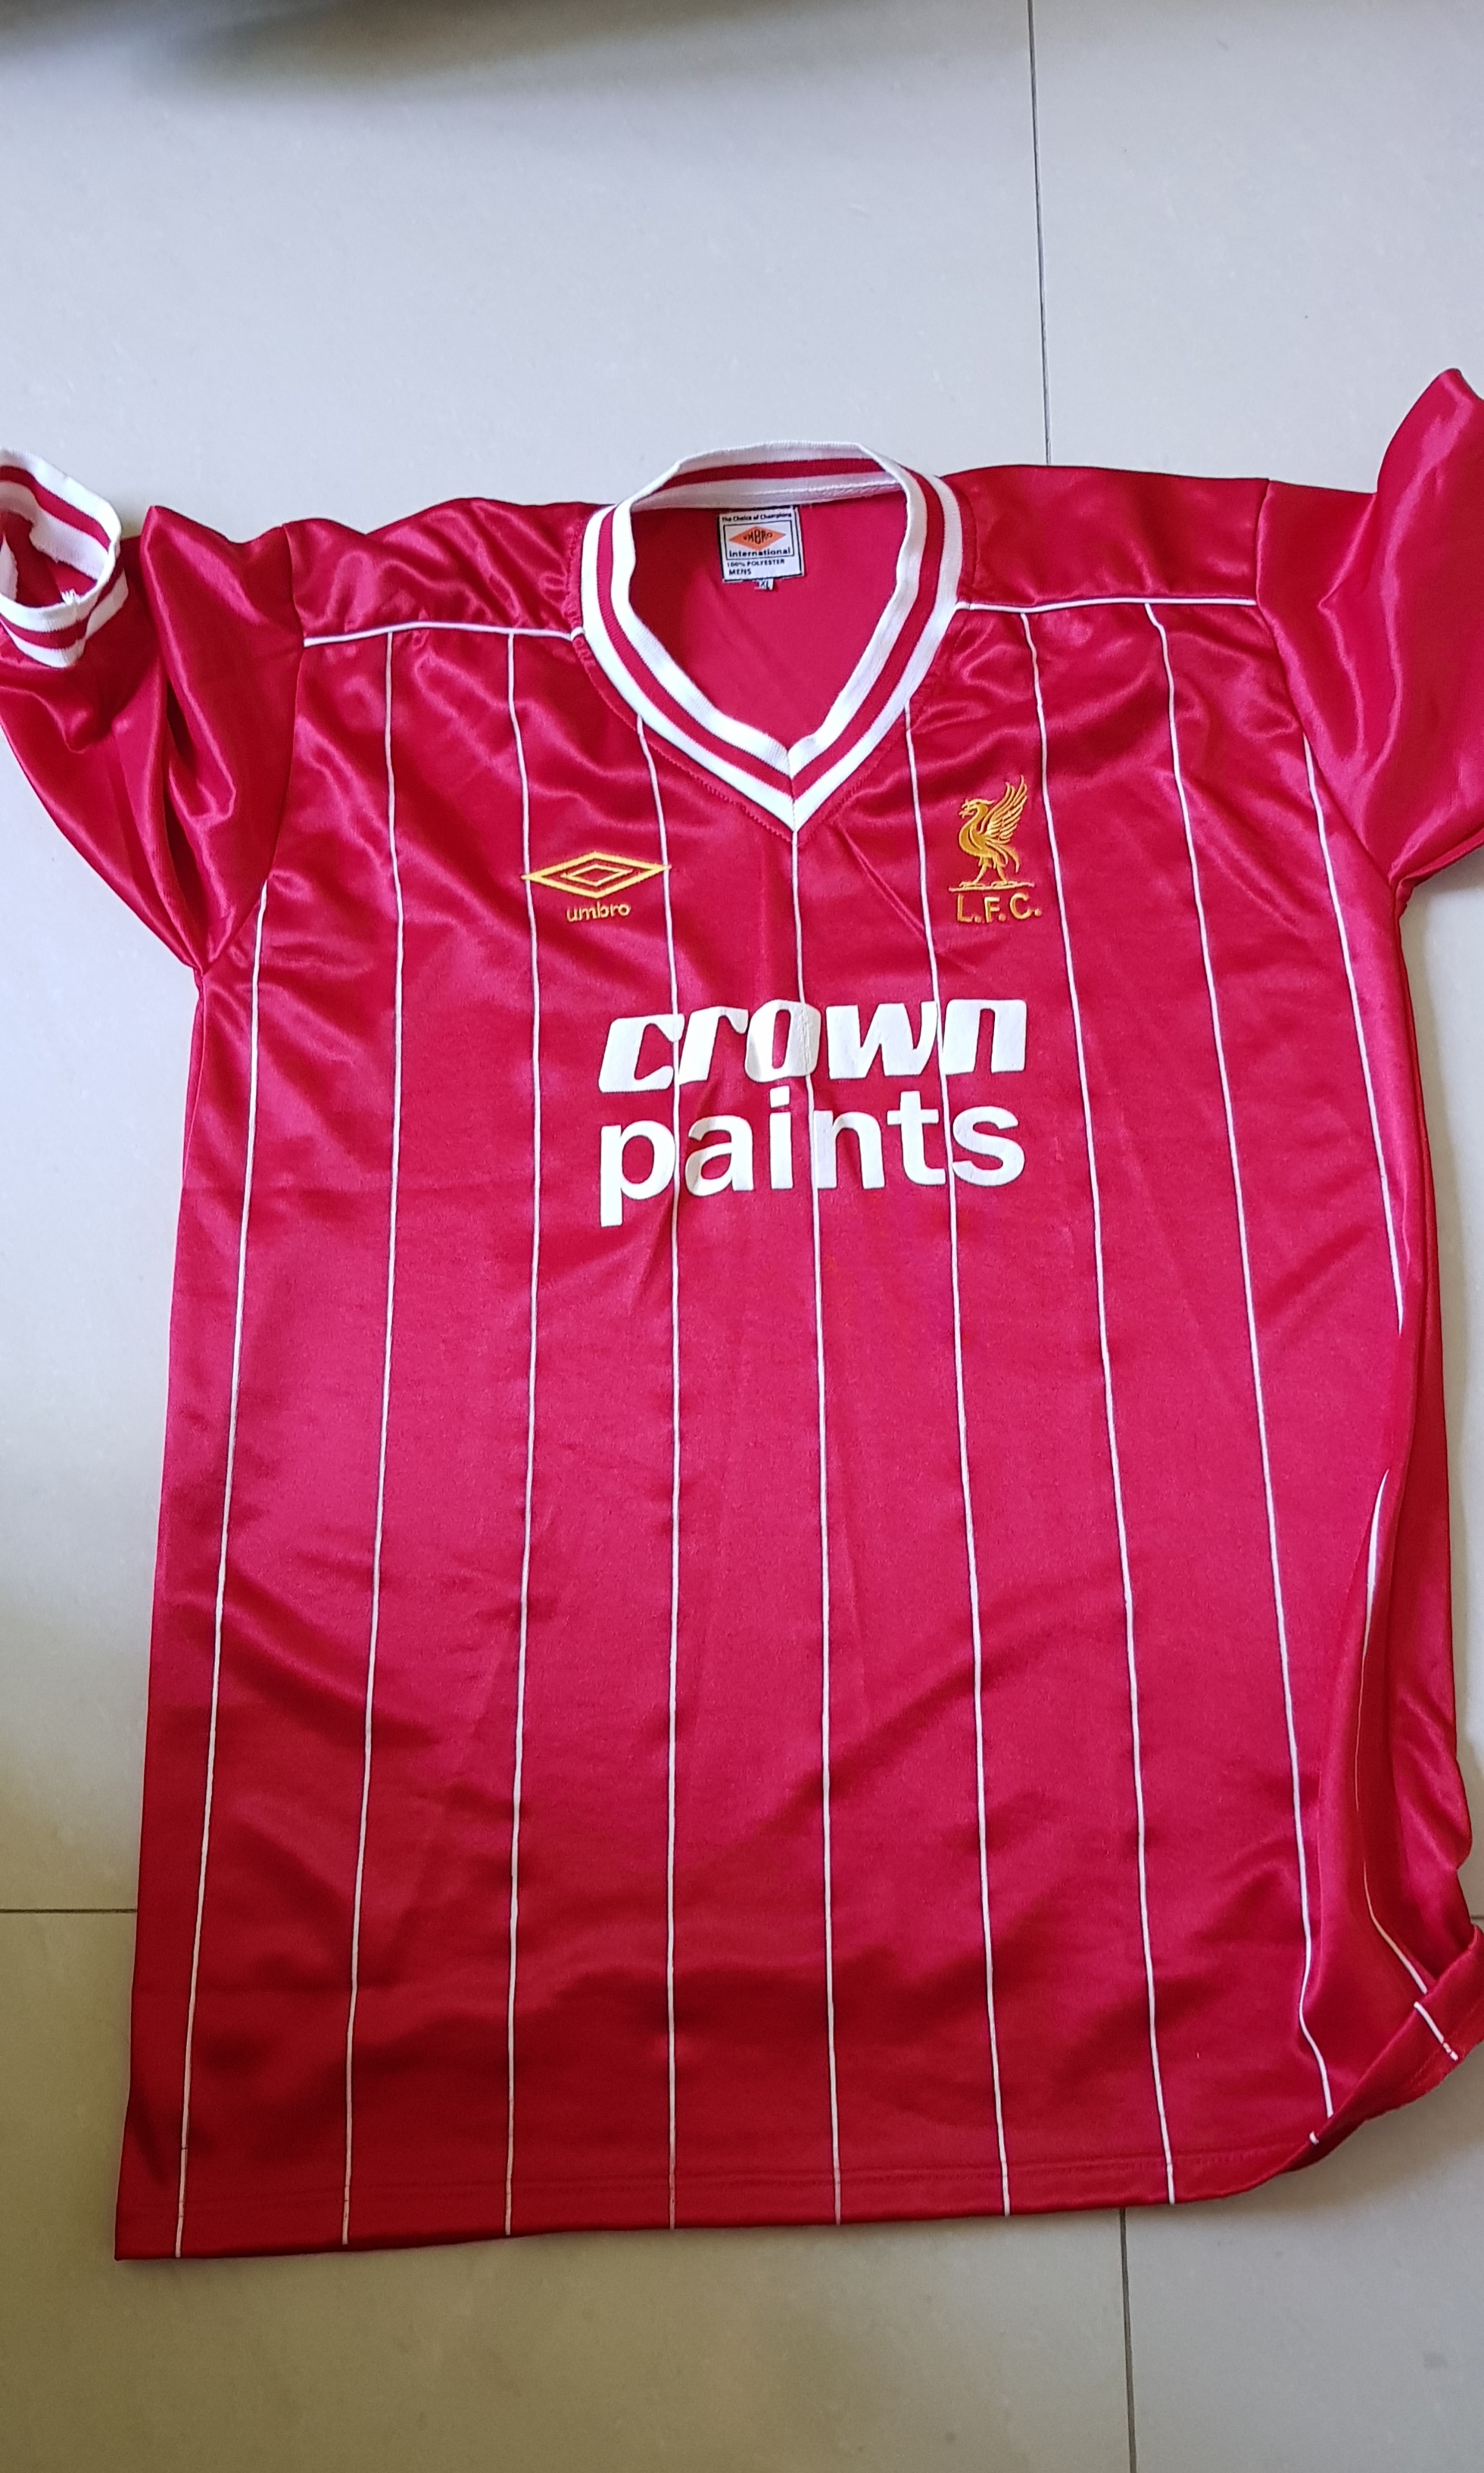 liverpool crown paints jersey